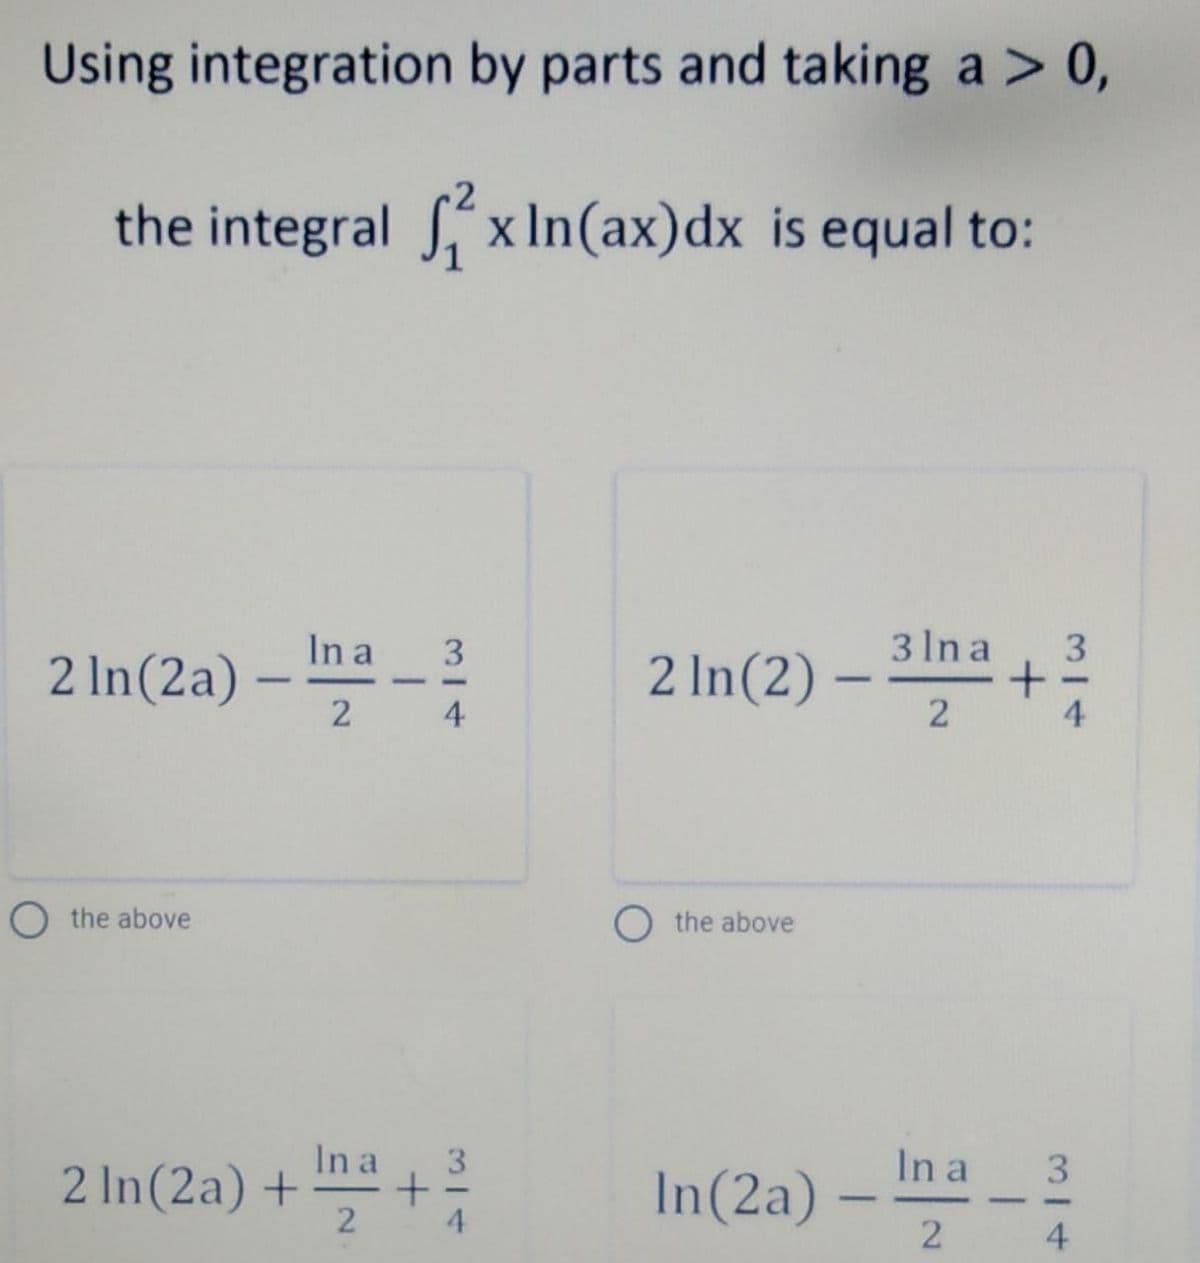 Using integration by parts and taking a > 0,
the integral x In(ax)dx is equal to:
2 In(2a) – ma –
3 Ina
2 In(2) –
3
3
U
-
4
O the above
the above
In a
2 In(2a) +
2
In a
In(2a) -
3.
3.
4.
4
2.
2.
